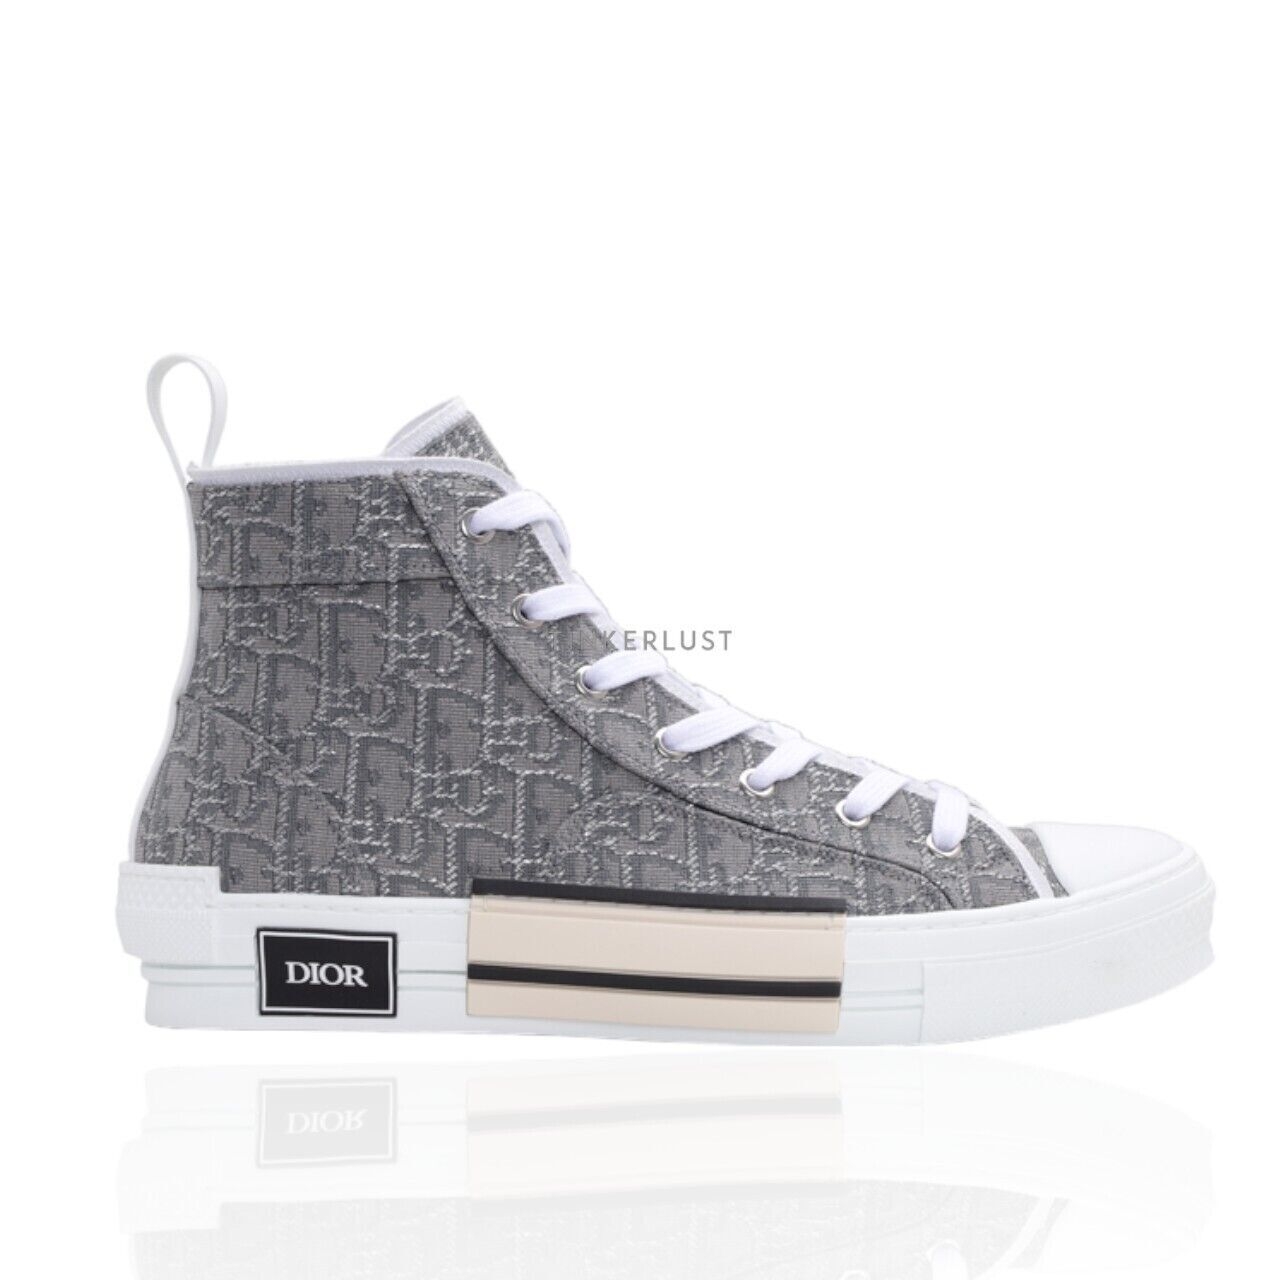 Christian Dior B23 Oblique in Ruthenium-Colored High Top Sneakers